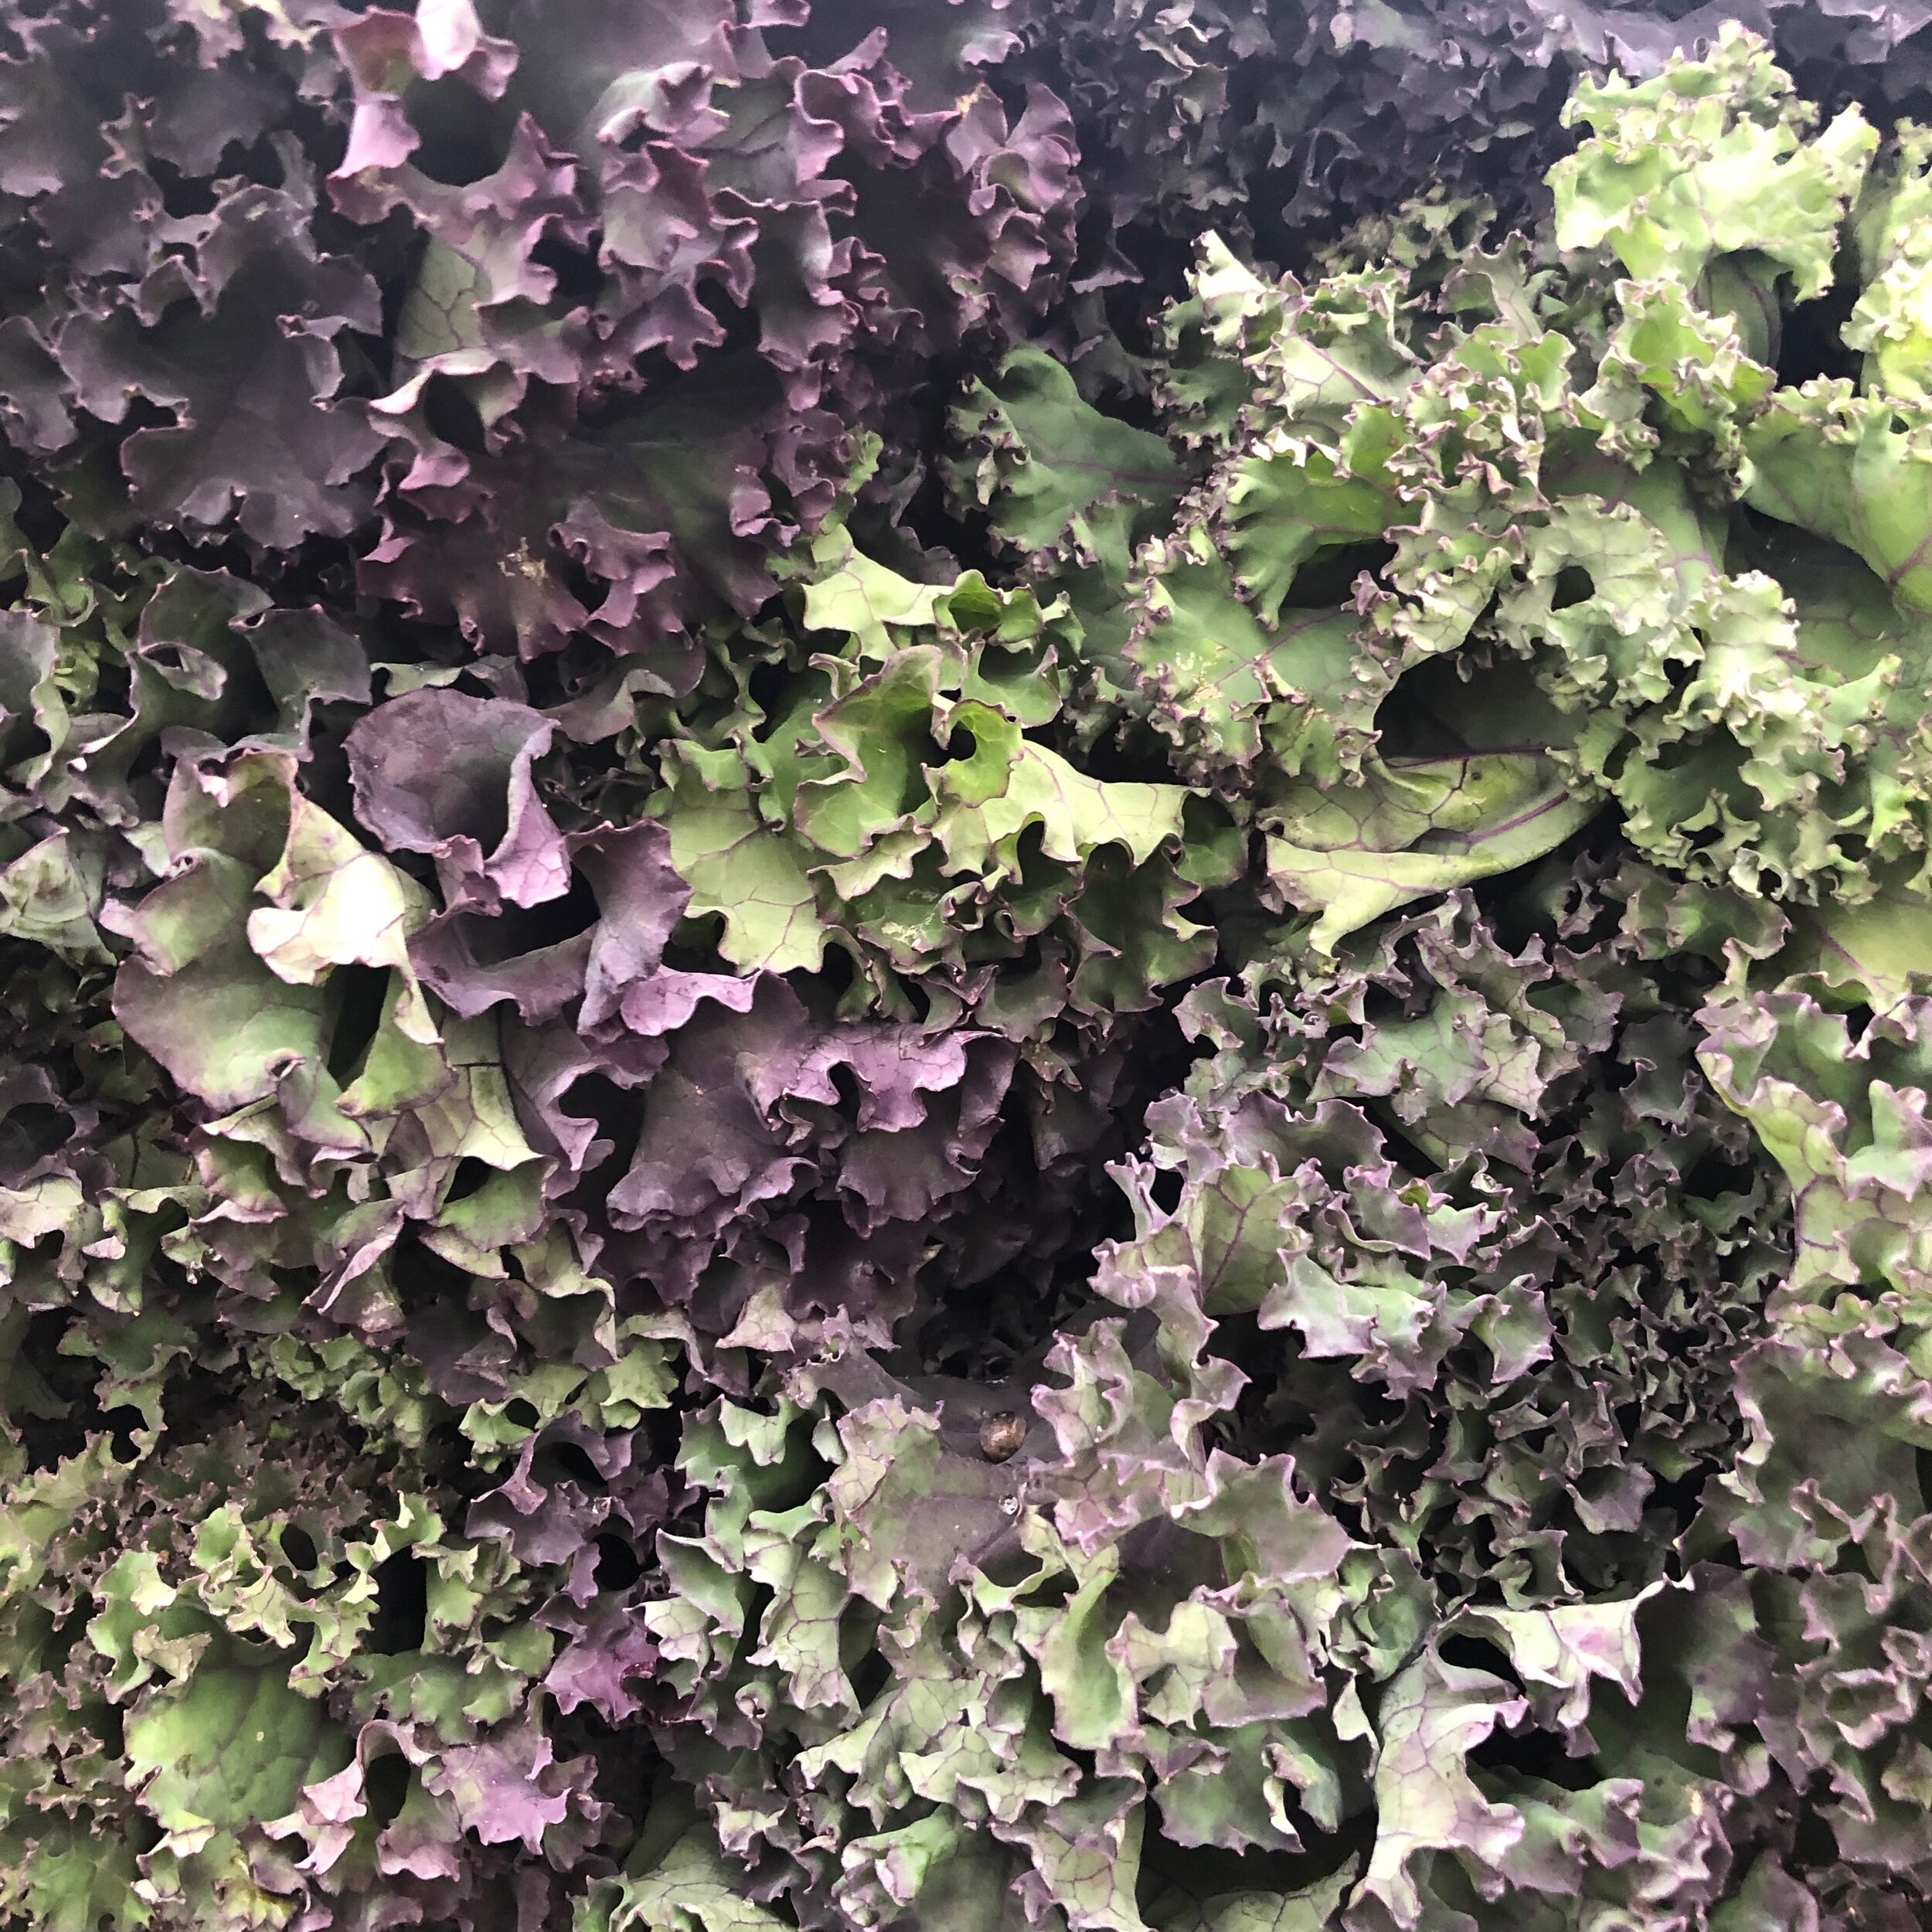 Curly leafed kale